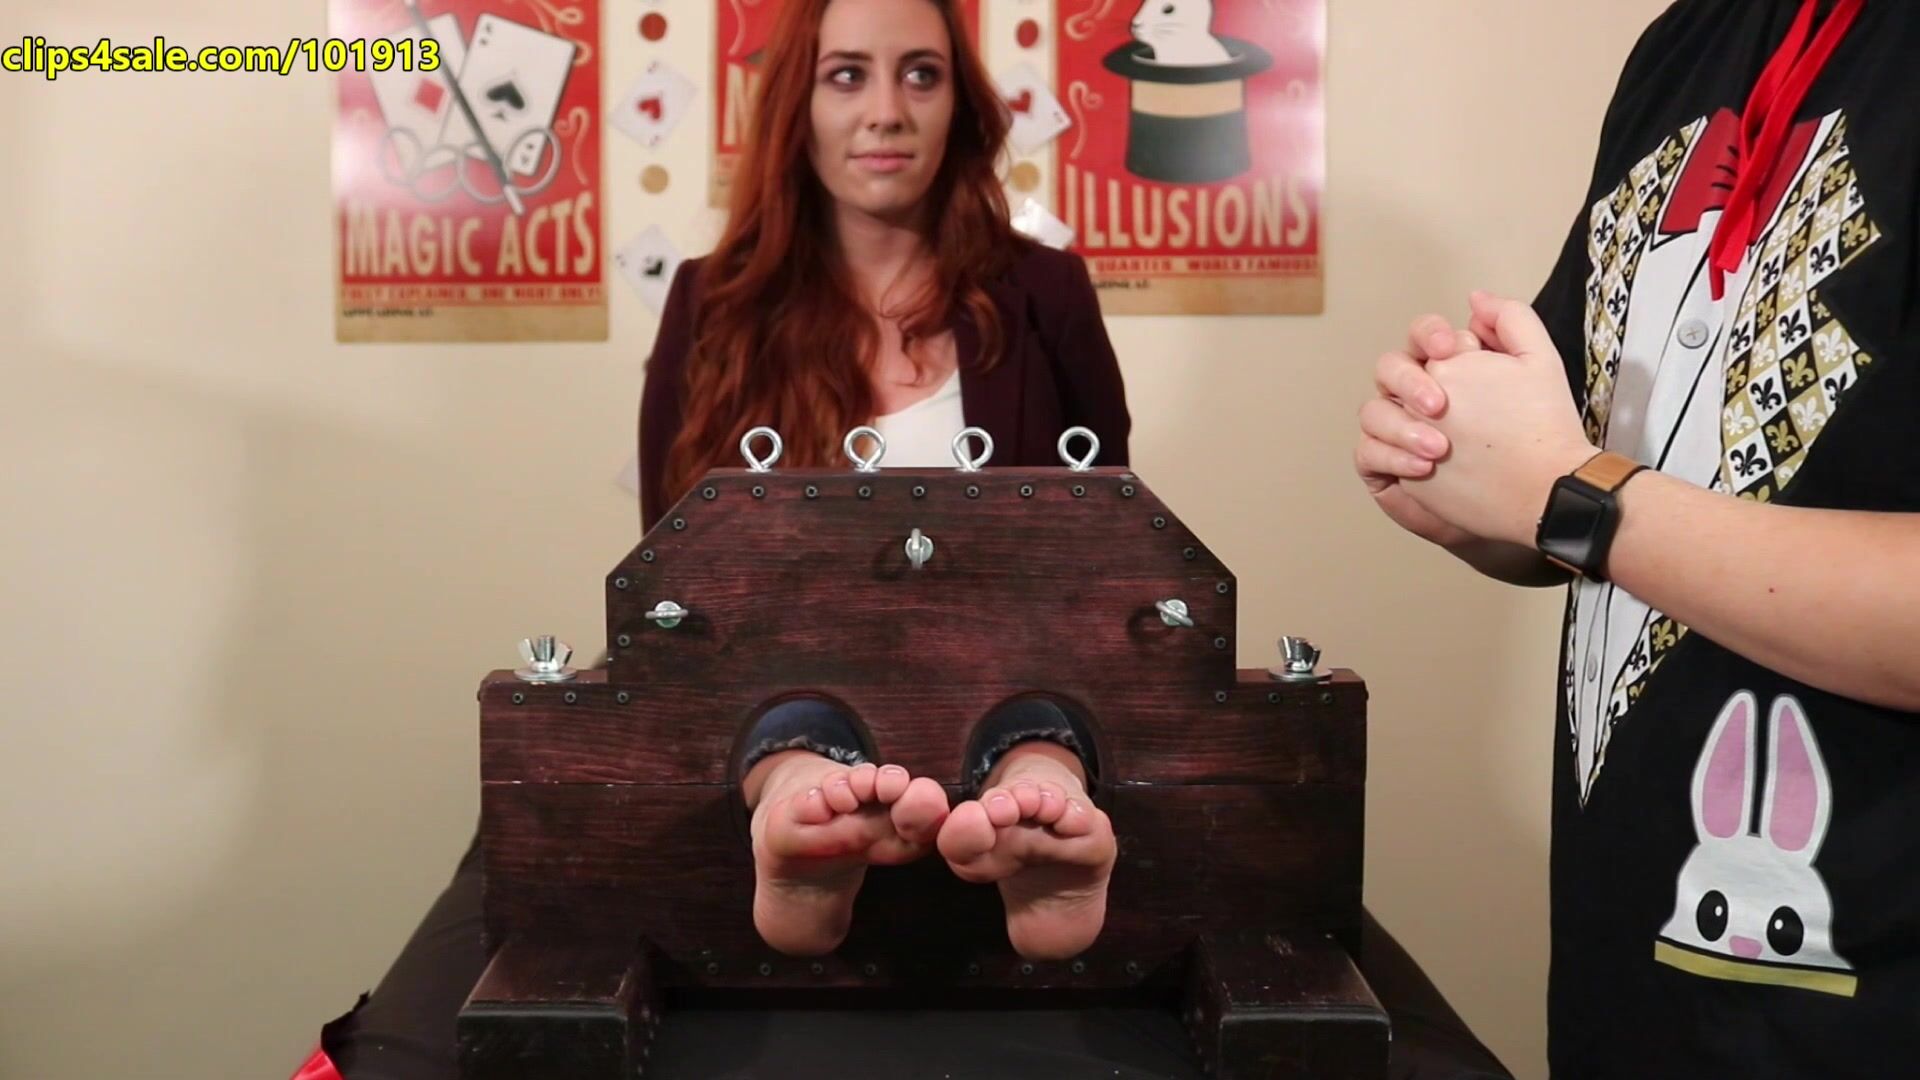 Random Sole Encounters – TICKLE FLIX JIllian Justice and the Stocks of Suggestion